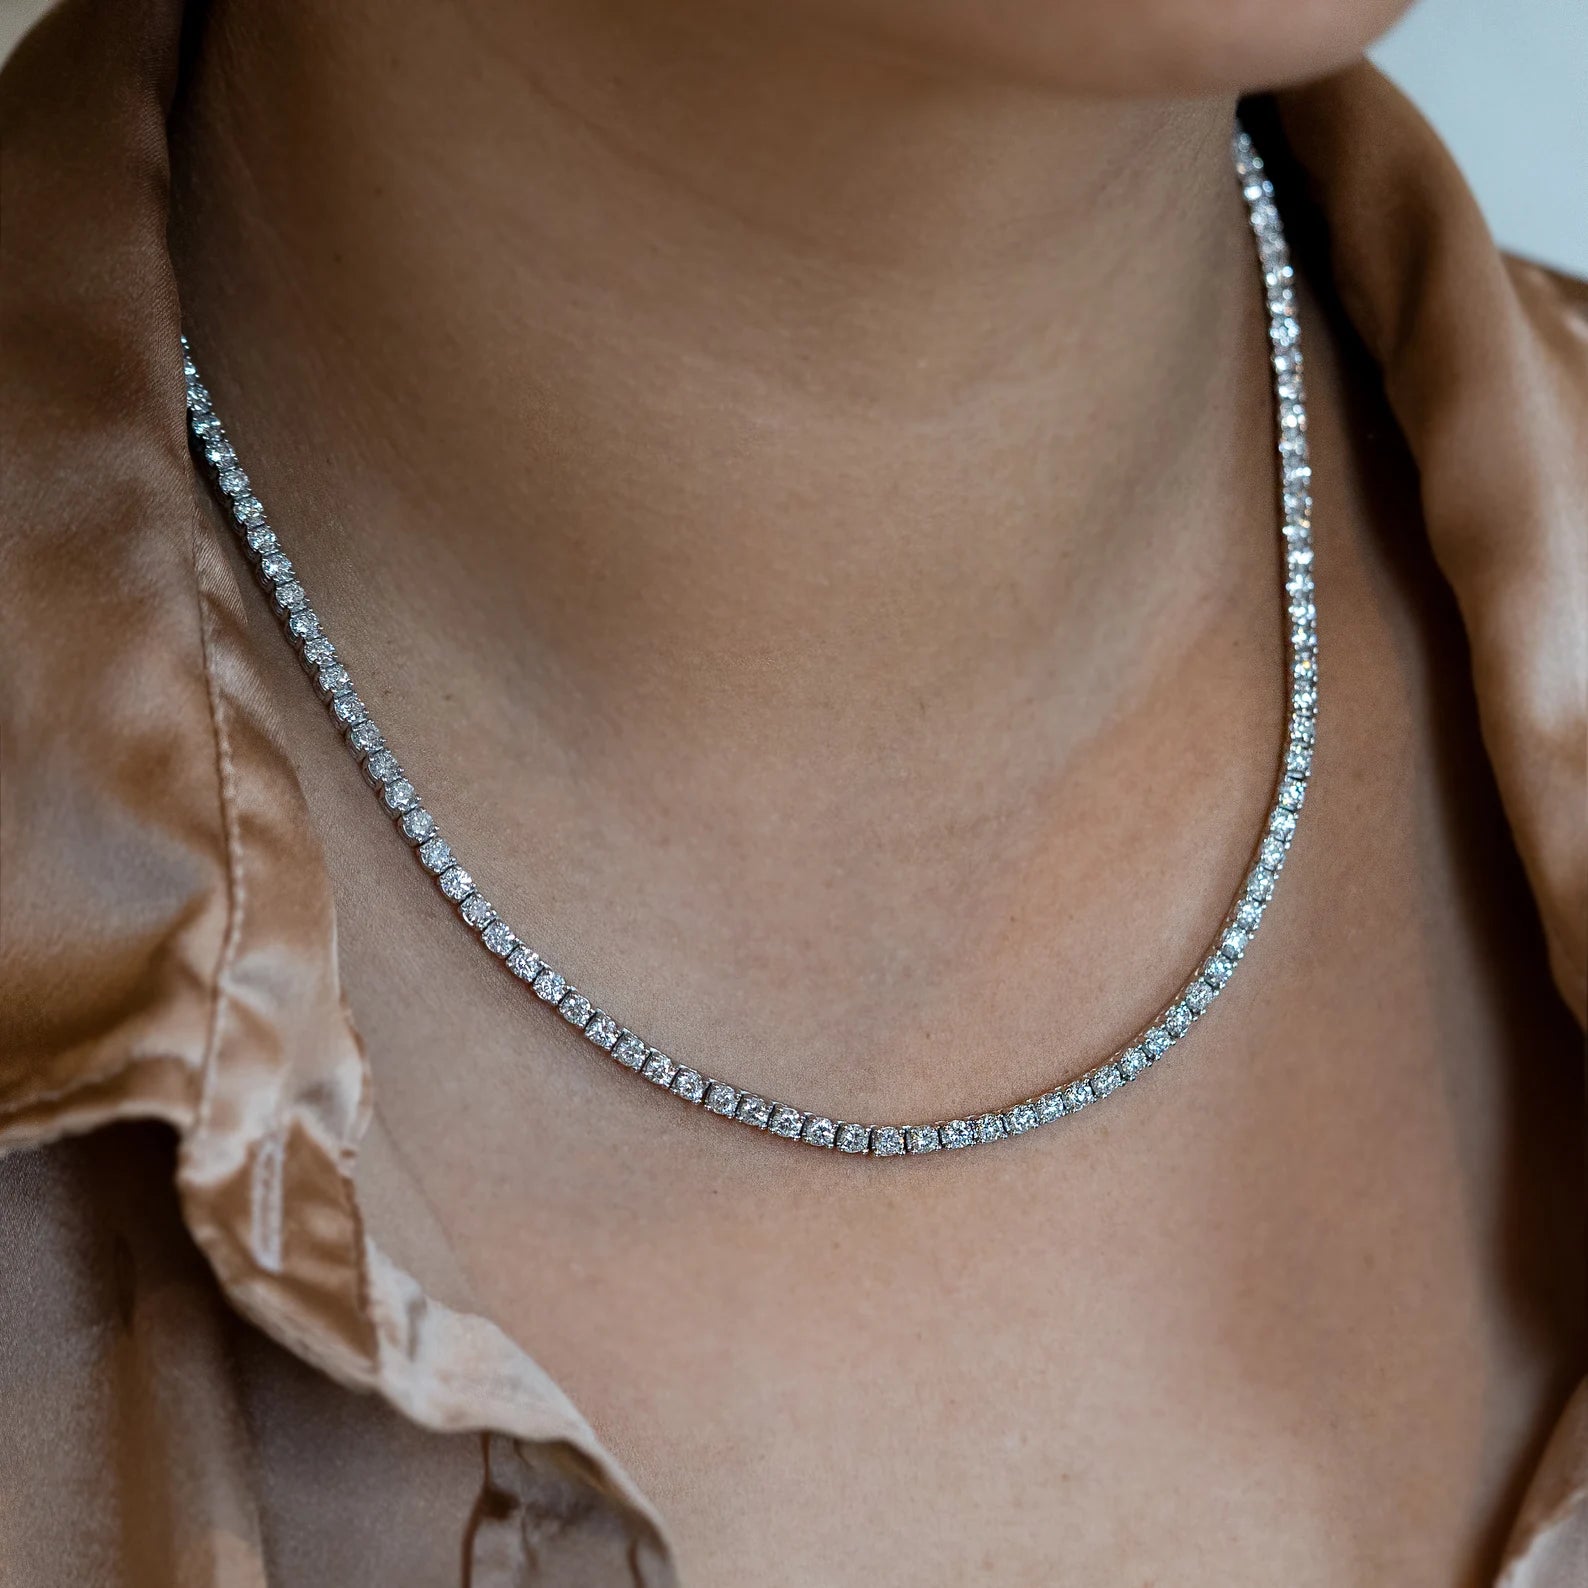 12 Carat Marquise Diamond Rivière (Tennis) Necklace | Marisa Perry by  Douglas Elliott - Necklaces Jewelry Collections